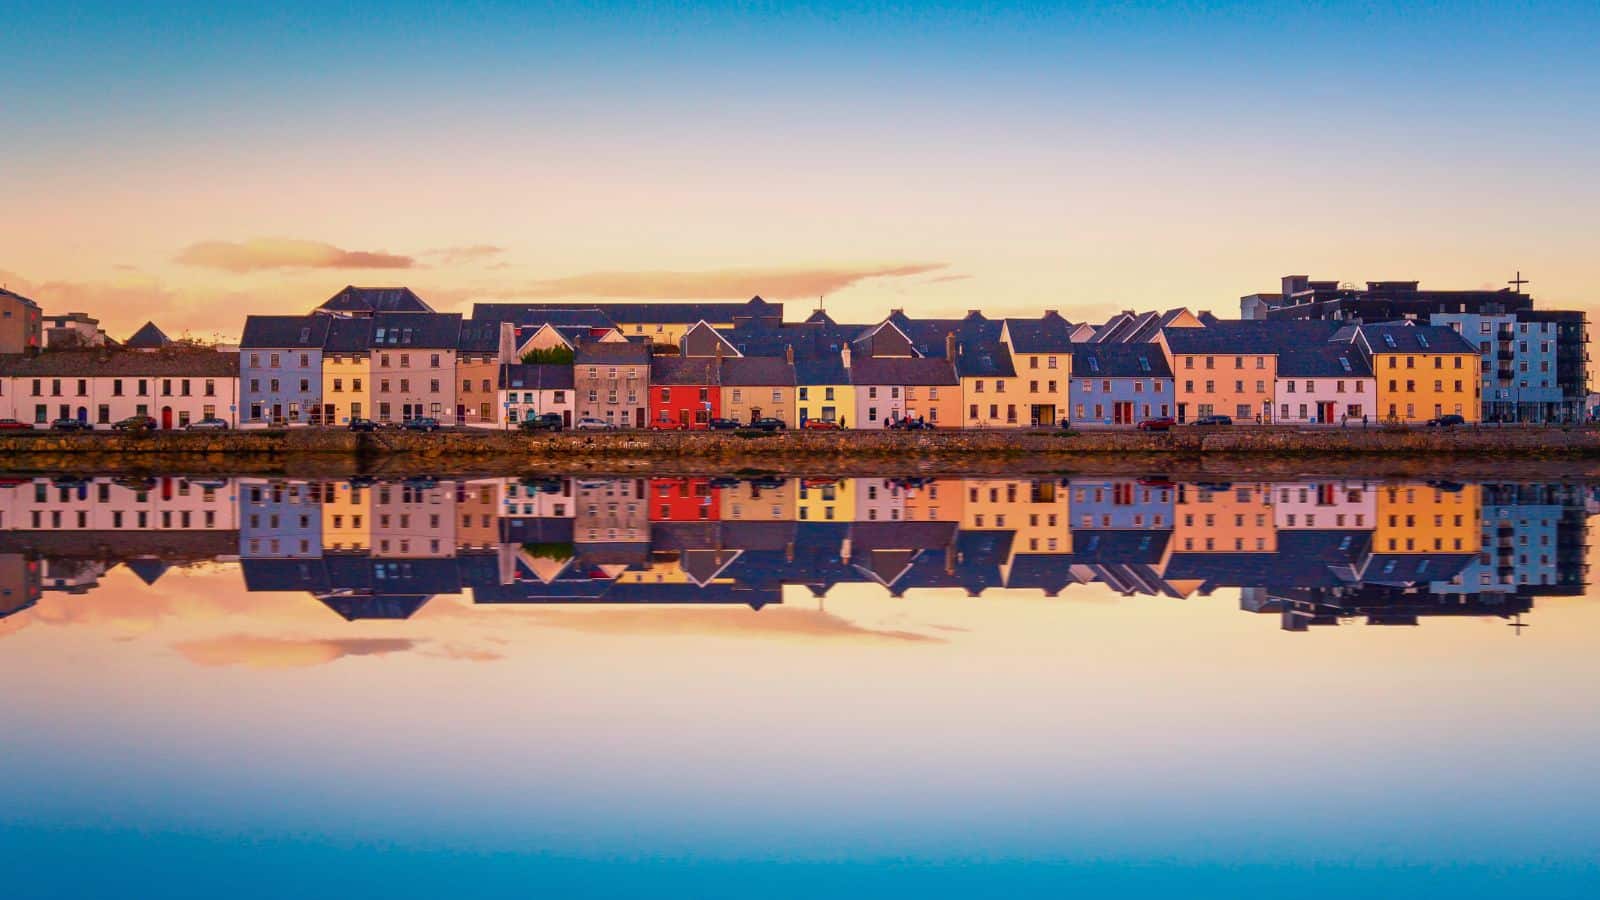 <p>Galway is a beautiful city on the west coast renowned for its colorful buildings and lively artistic vibe. It’s a fun place steeped in <a href="https://www.whatsdannydoing.com/blog/celtic-symbols-and-meanings" rel="noreferrer noopener">Celtic culture</a> and traditions. If you want to drink, dance, sing, and enjoy the best of Irish music, then go to Galway! Sure, it’s busy and touristy, but that all adds to the atmosphere.</p>